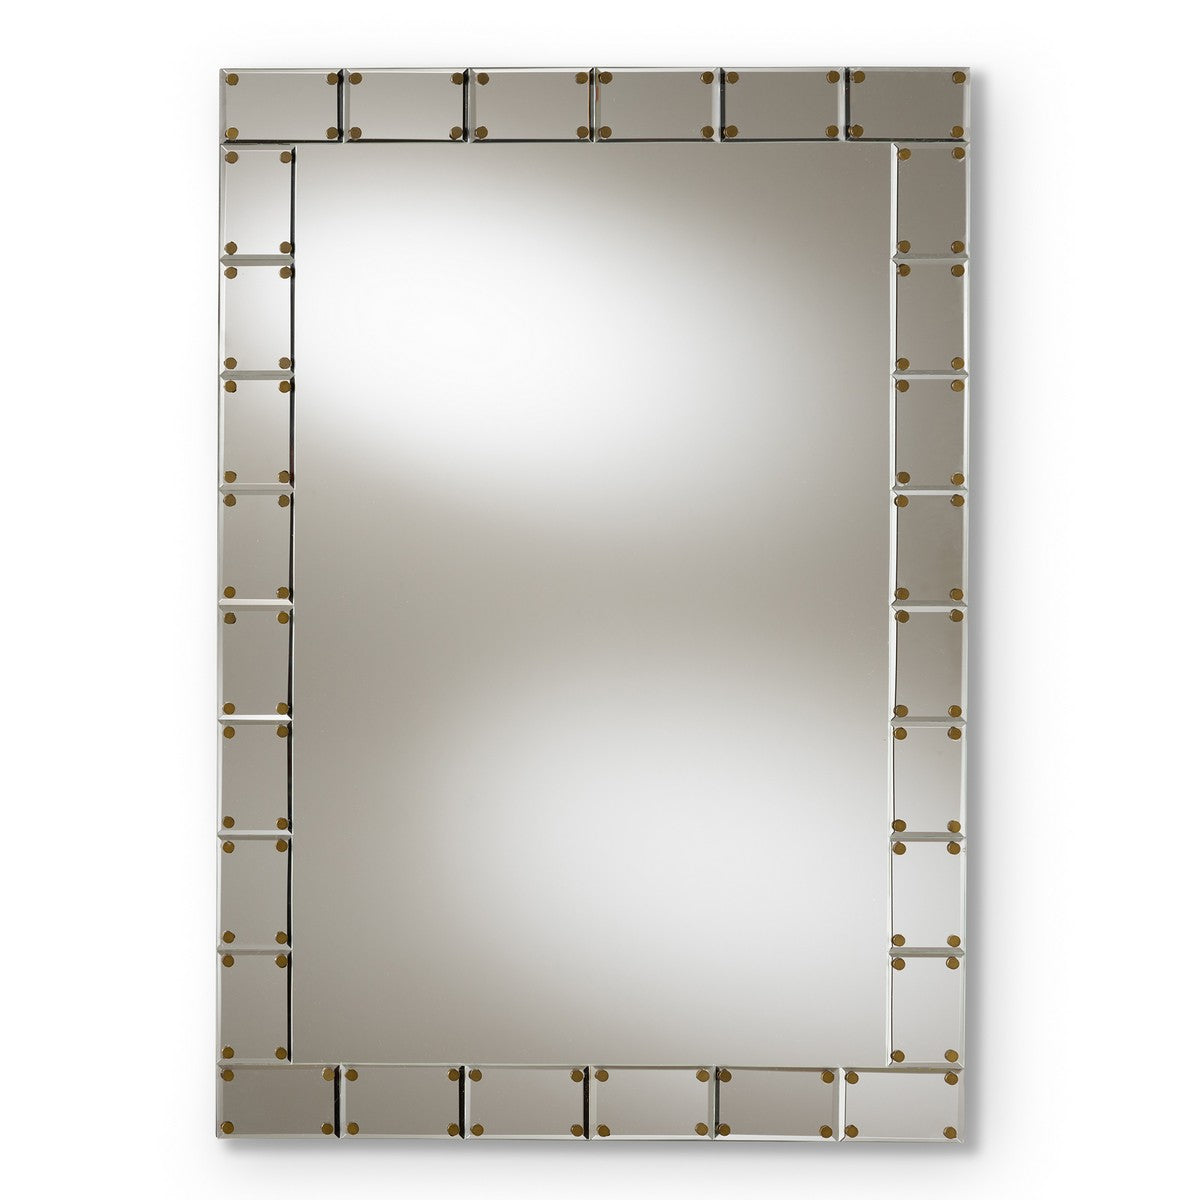 Baxton Studio Almeria Modern and Contemporary Silver Finished Rectangular Tile Accent Wall Mirror Baxton Studio-mirrors-Minimal And Modern - 1